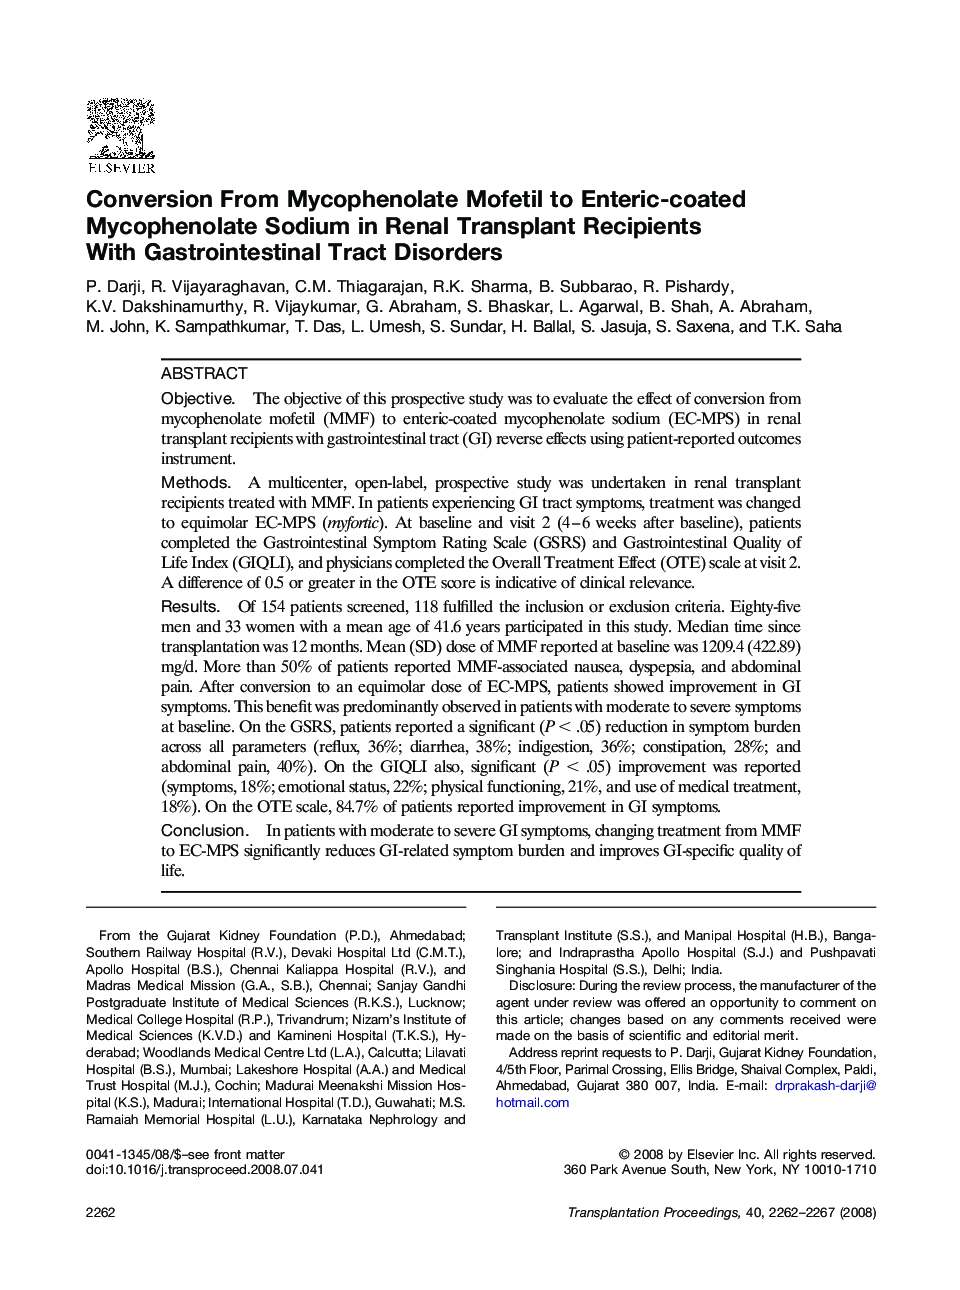 Conversion From Mycophenolate Mofetil to Enteric-coated Mycophenolate Sodium in Renal Transplant Recipients With Gastrointestinal Tract Disorders 